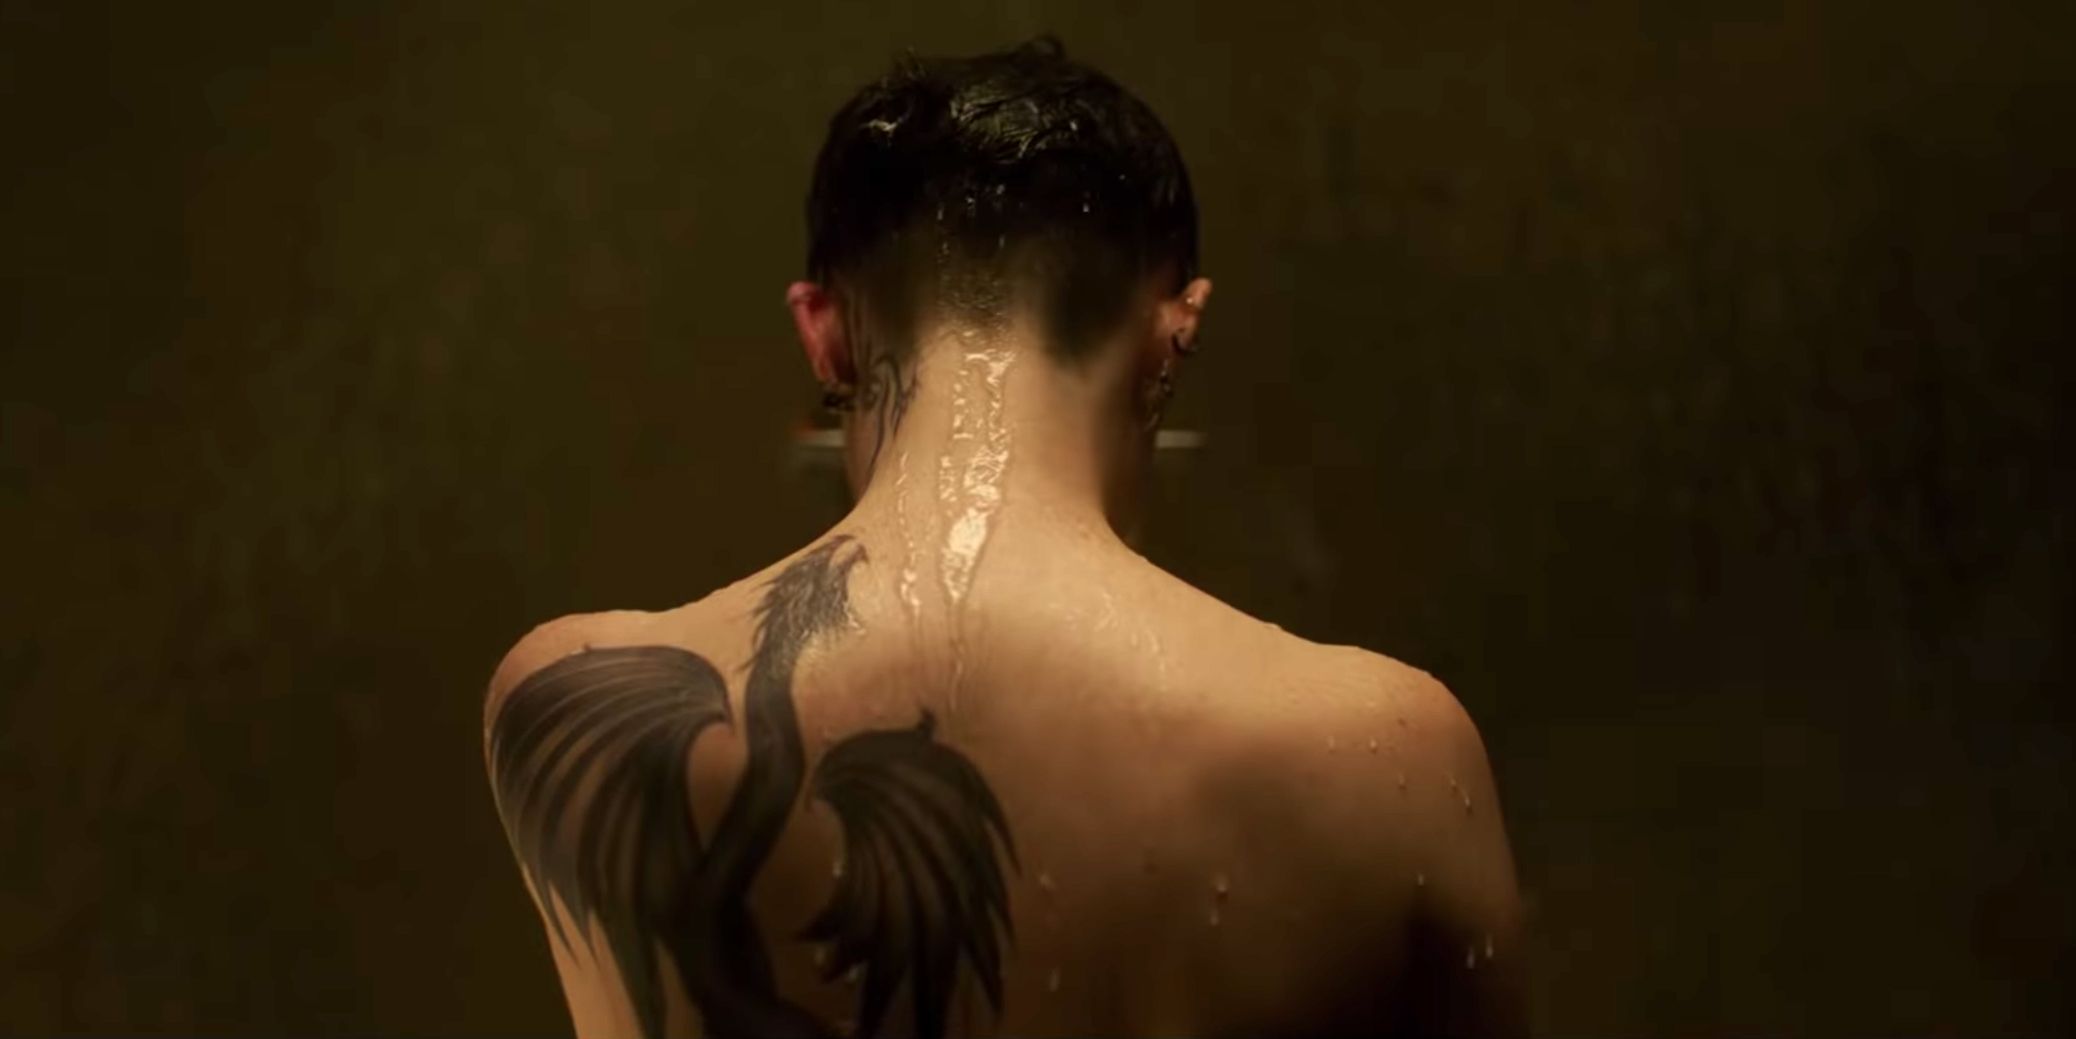 Dragon Tattoo' remade with a vengeance - The San Diego Union-Tribune